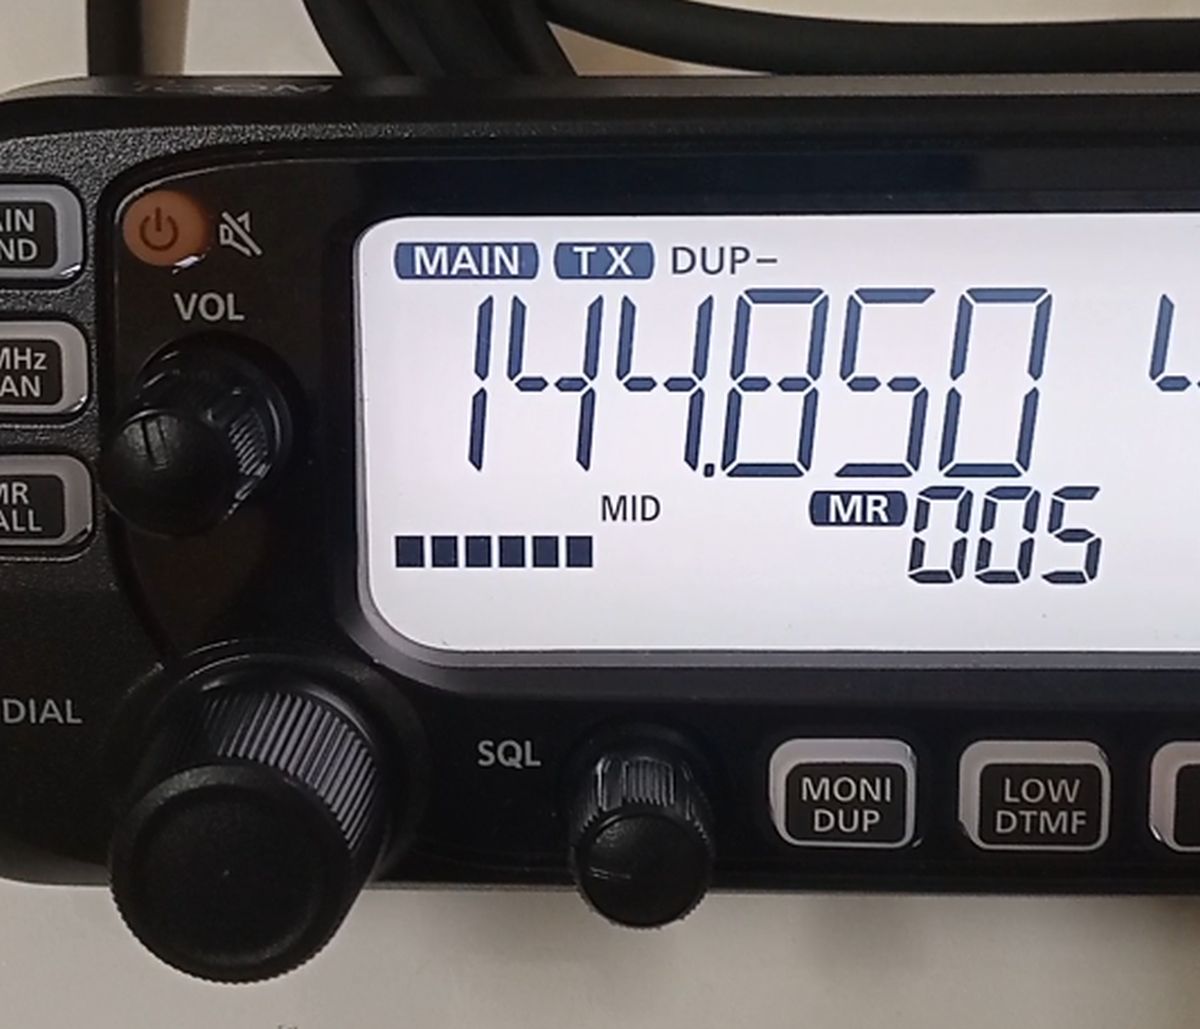 In TX mode when PTT is pressed, with mid power on ICOM 2730